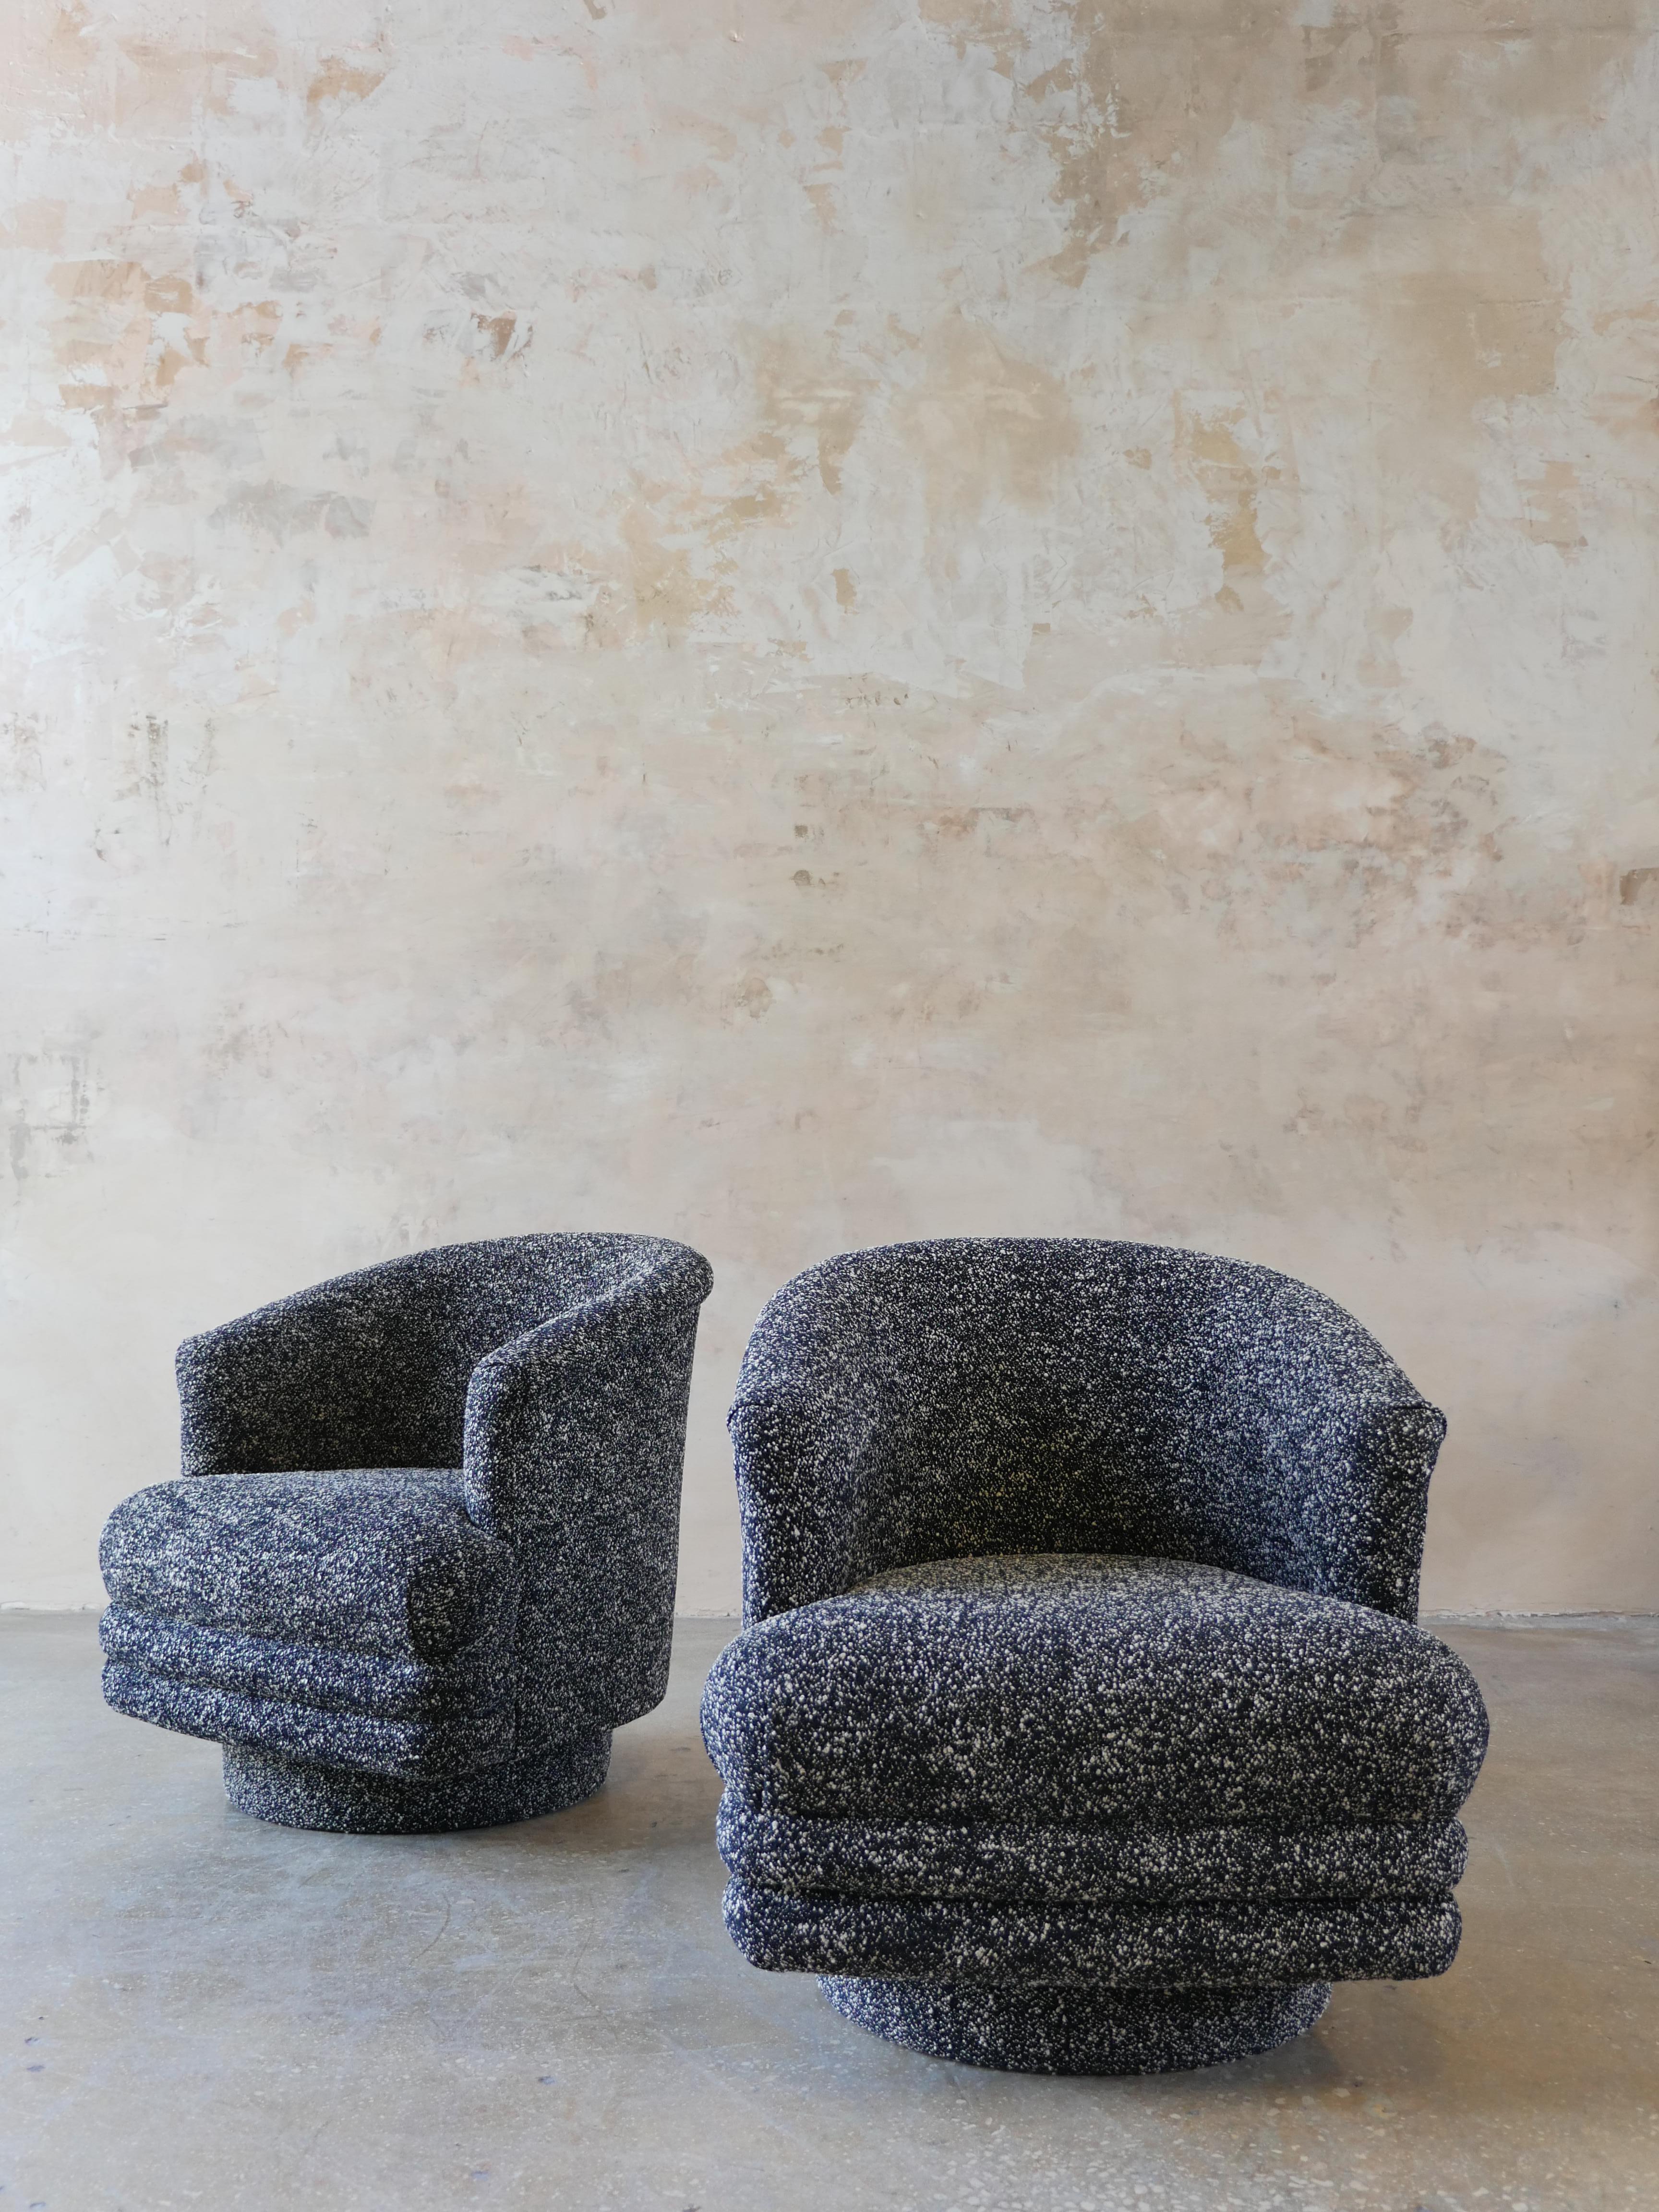 Chenille 1980s Directional Furniture Designer Swivel Chairs, Set of 2 For Sale